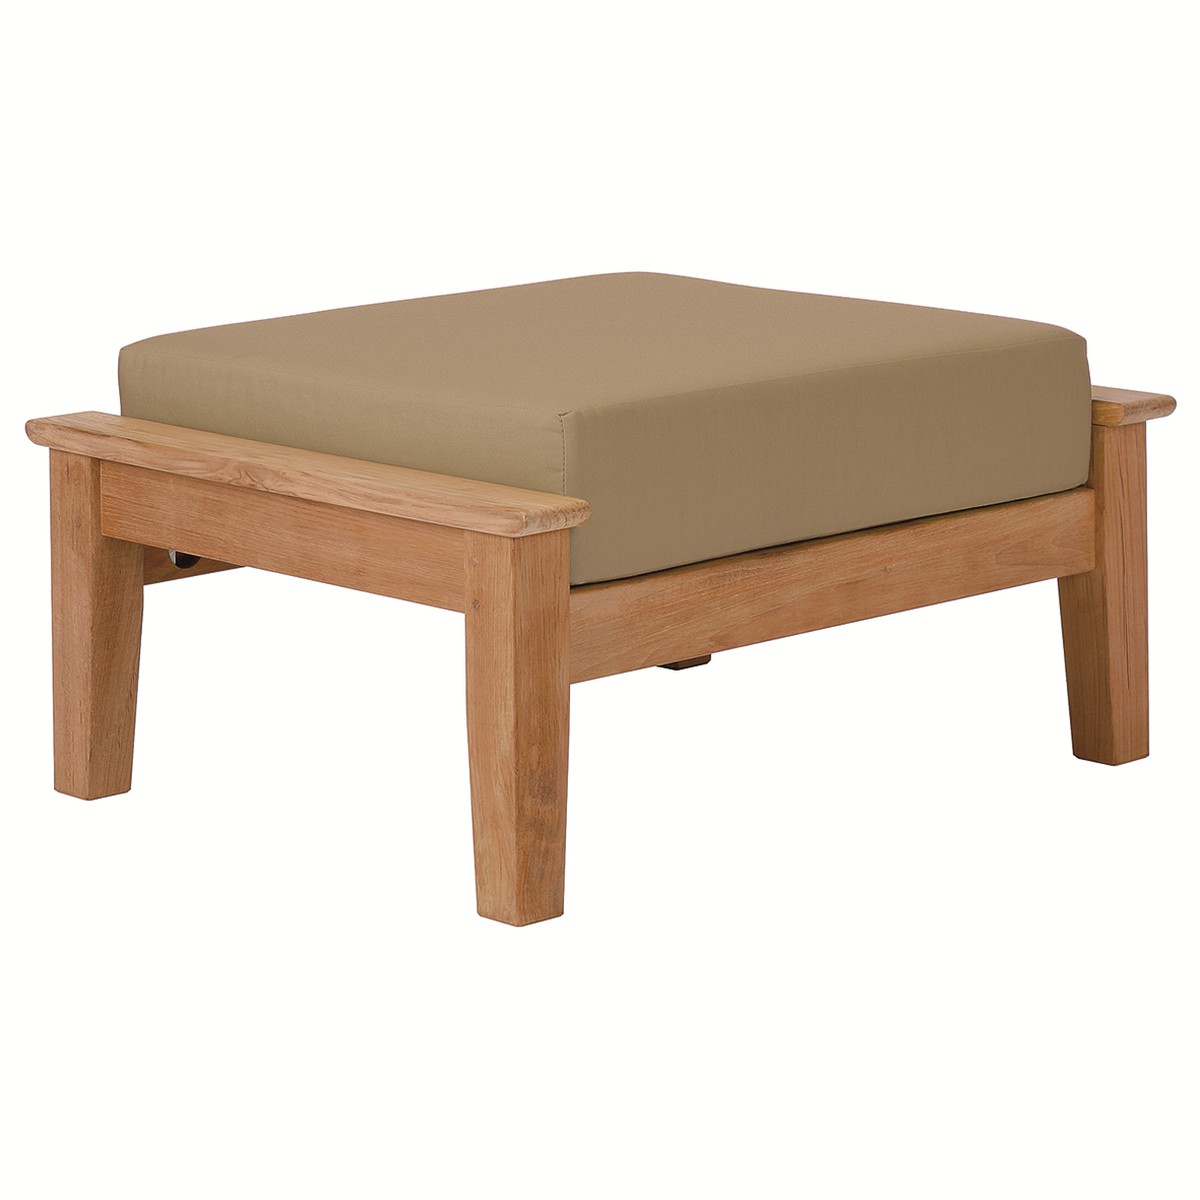 Barlow Tyrie Haven Repose pied Haven Deep Seating Gris taupe 79cmx39.5cmx65cm